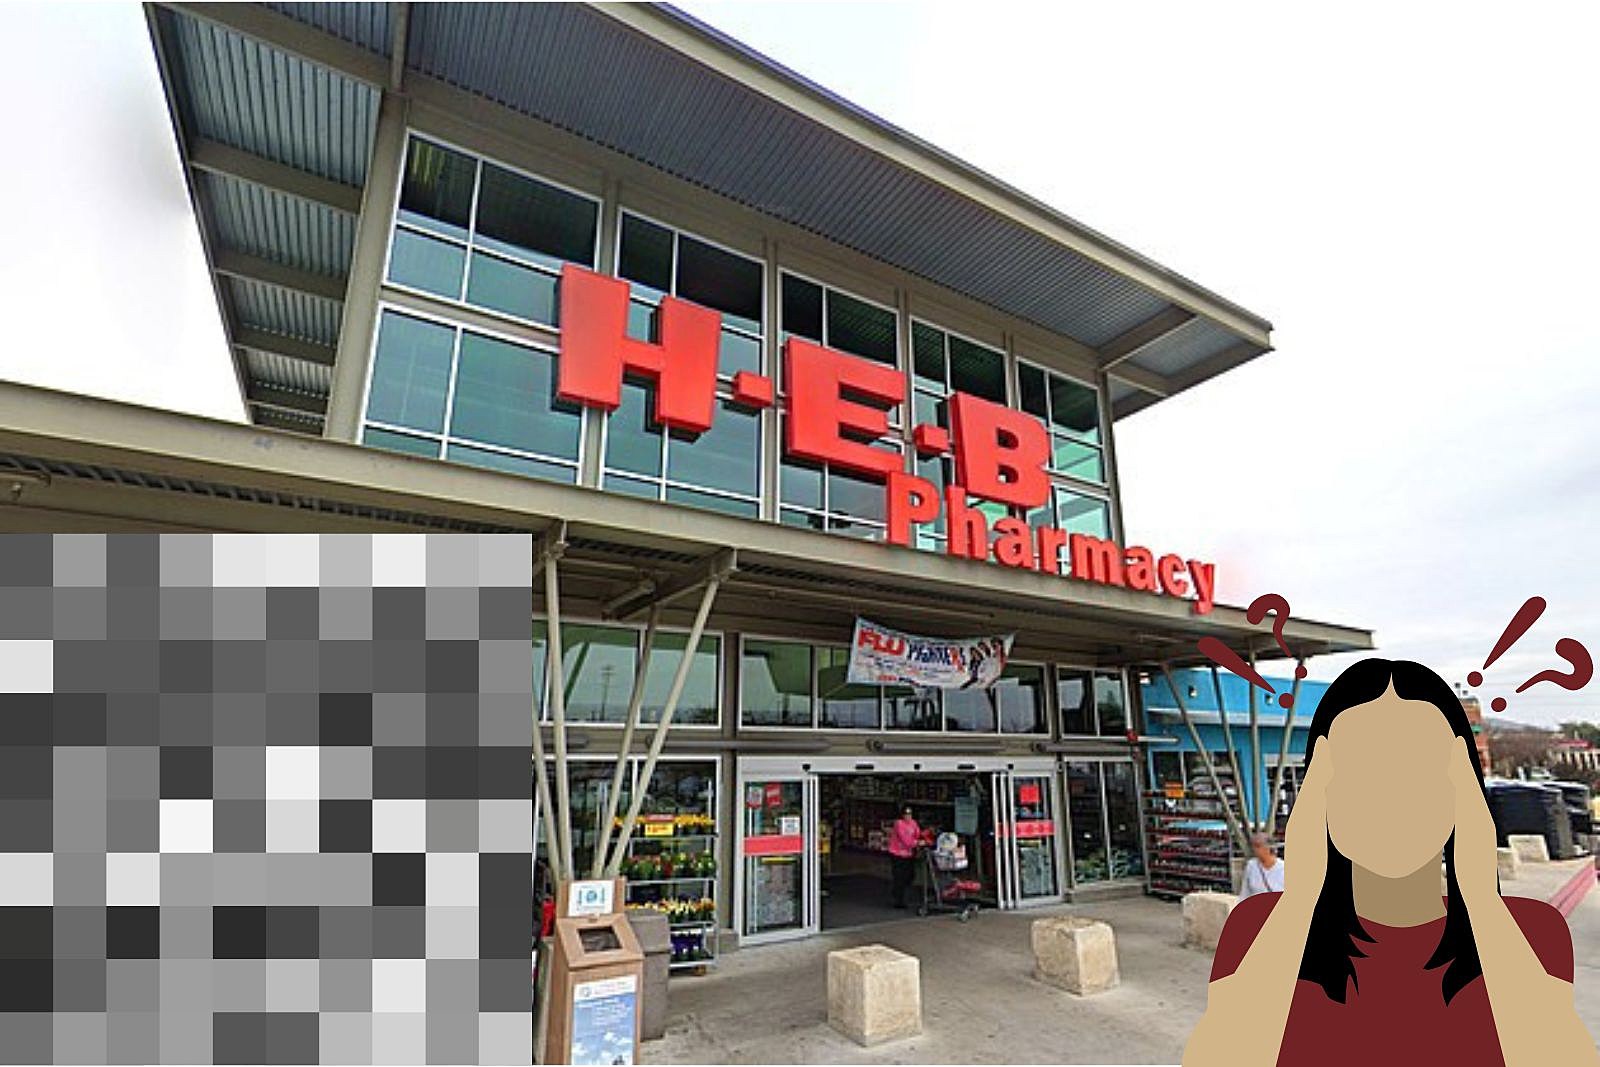 What Gigantic H-E-B Themed Item Is Set To Appear In Houston, TX?